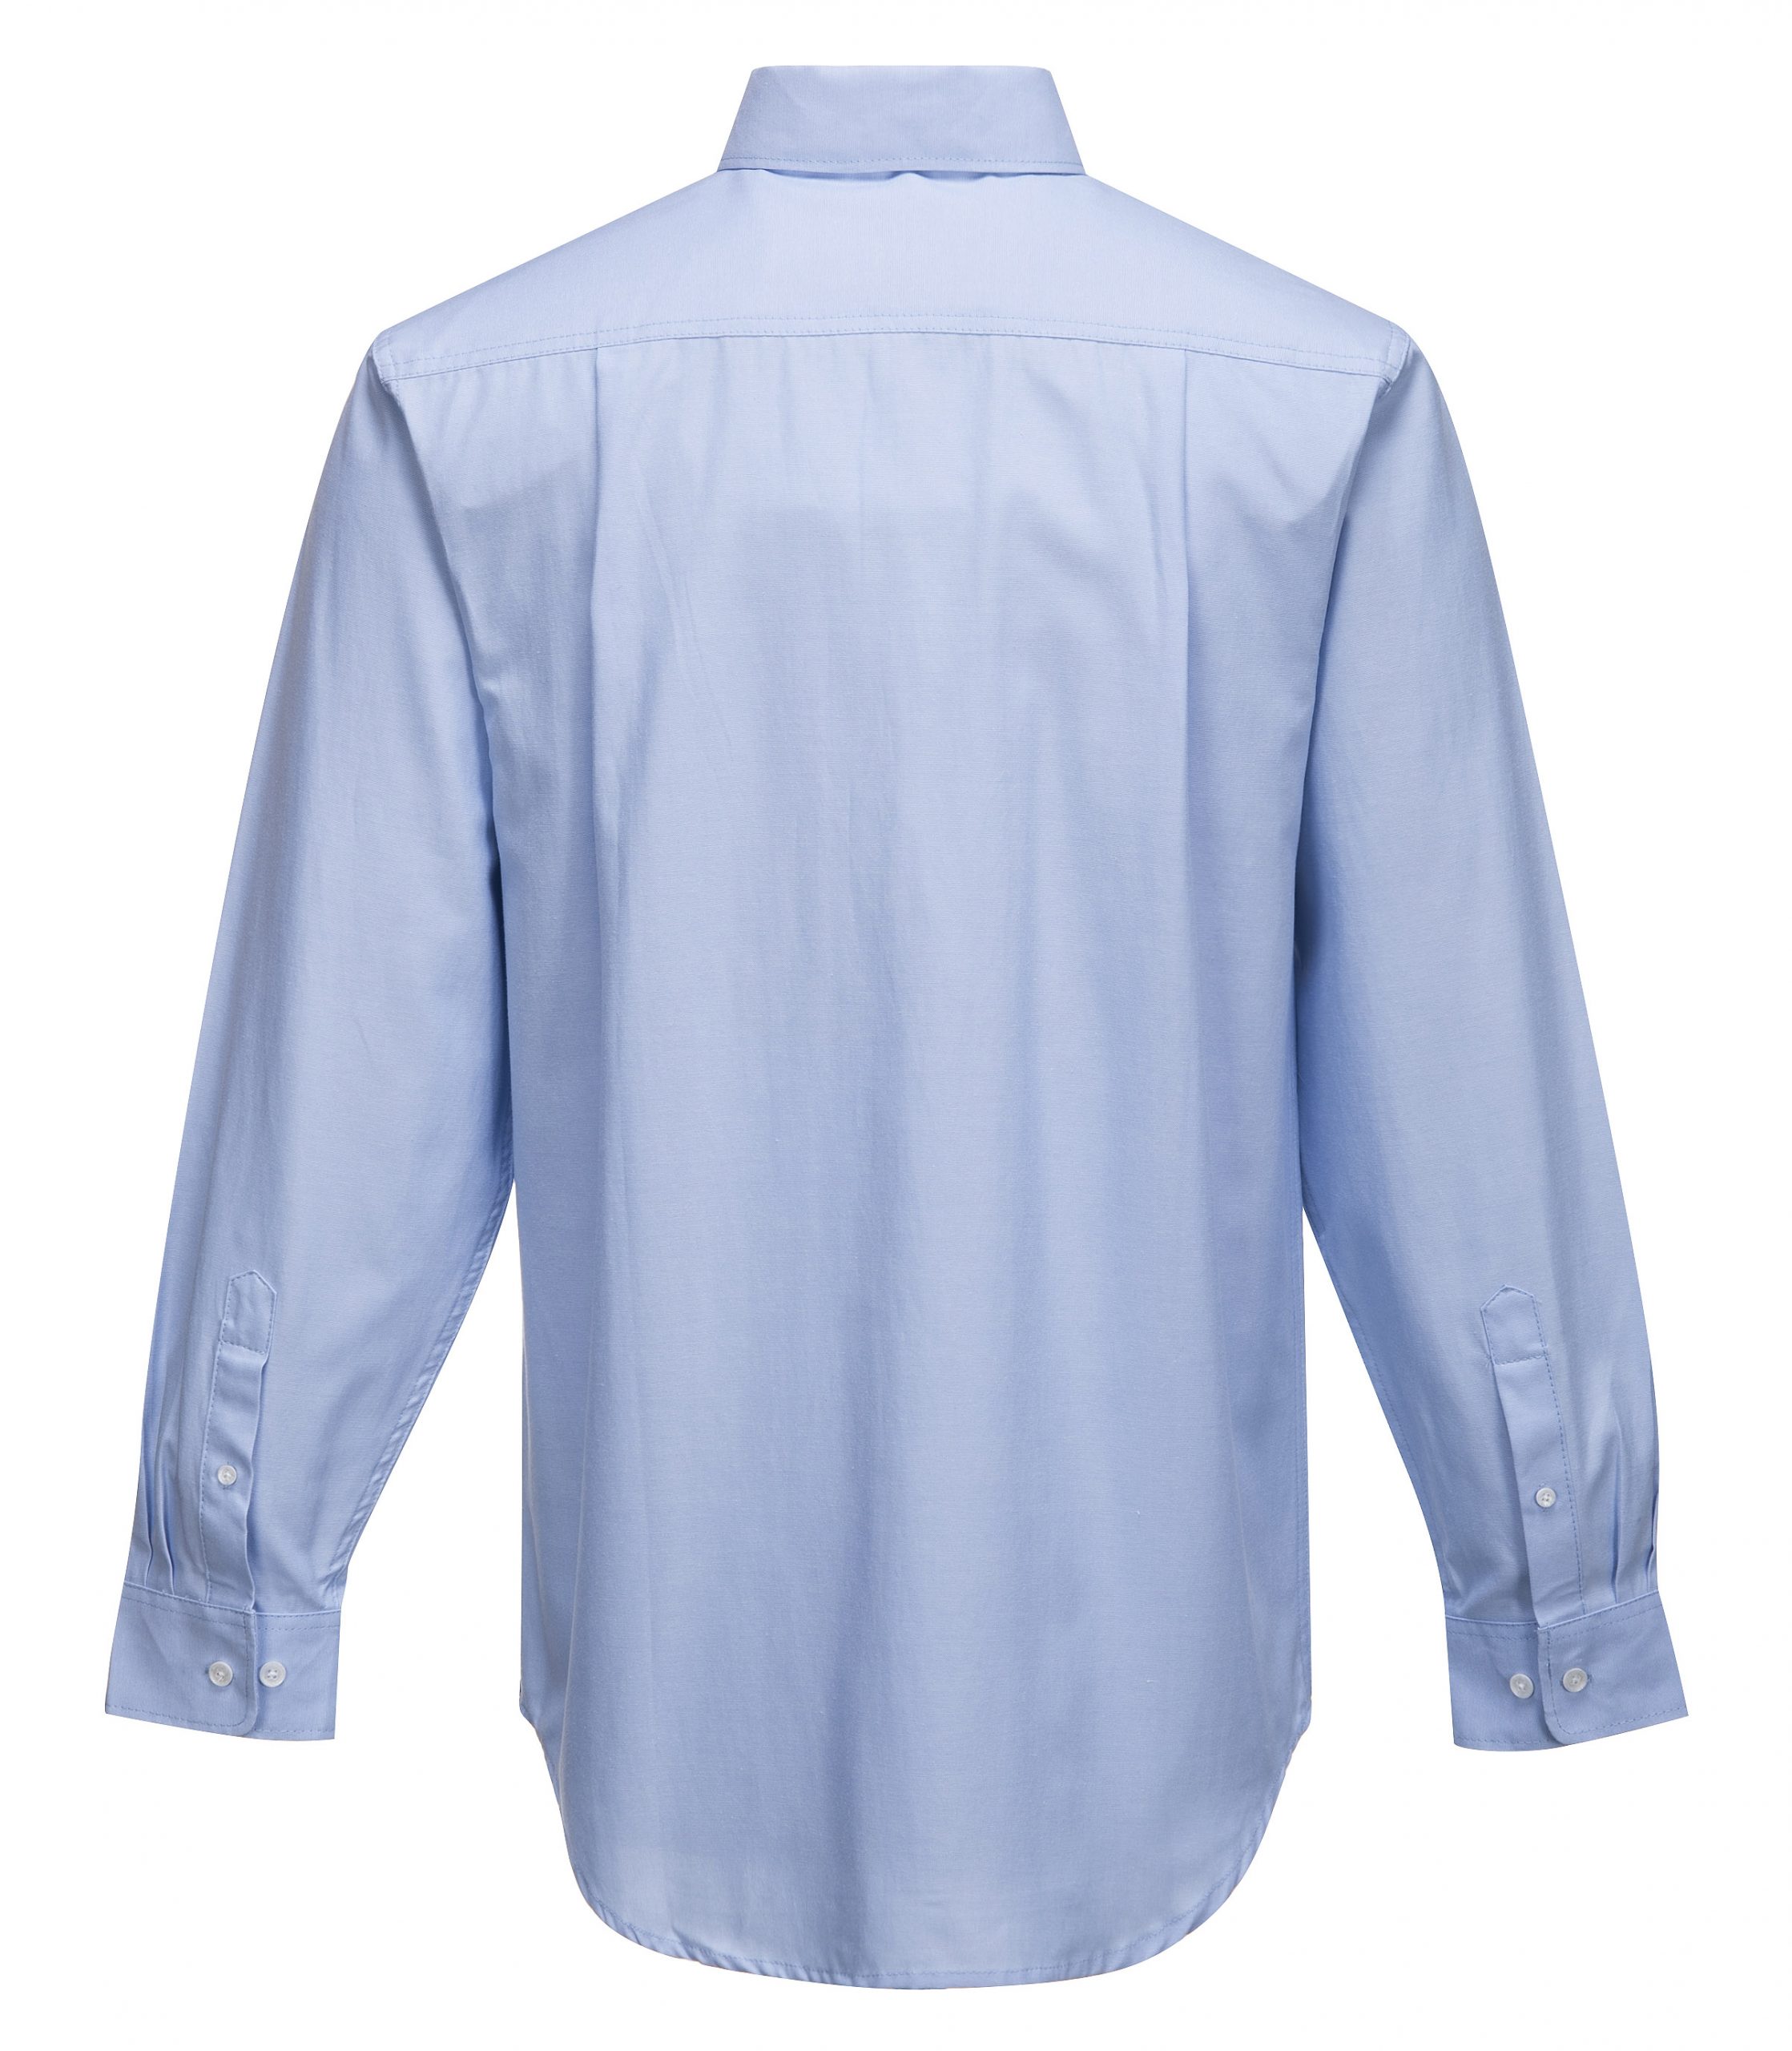 MS868 - Adelaide Shirt, Poly Cotton Long Sleeve, Light Weight R